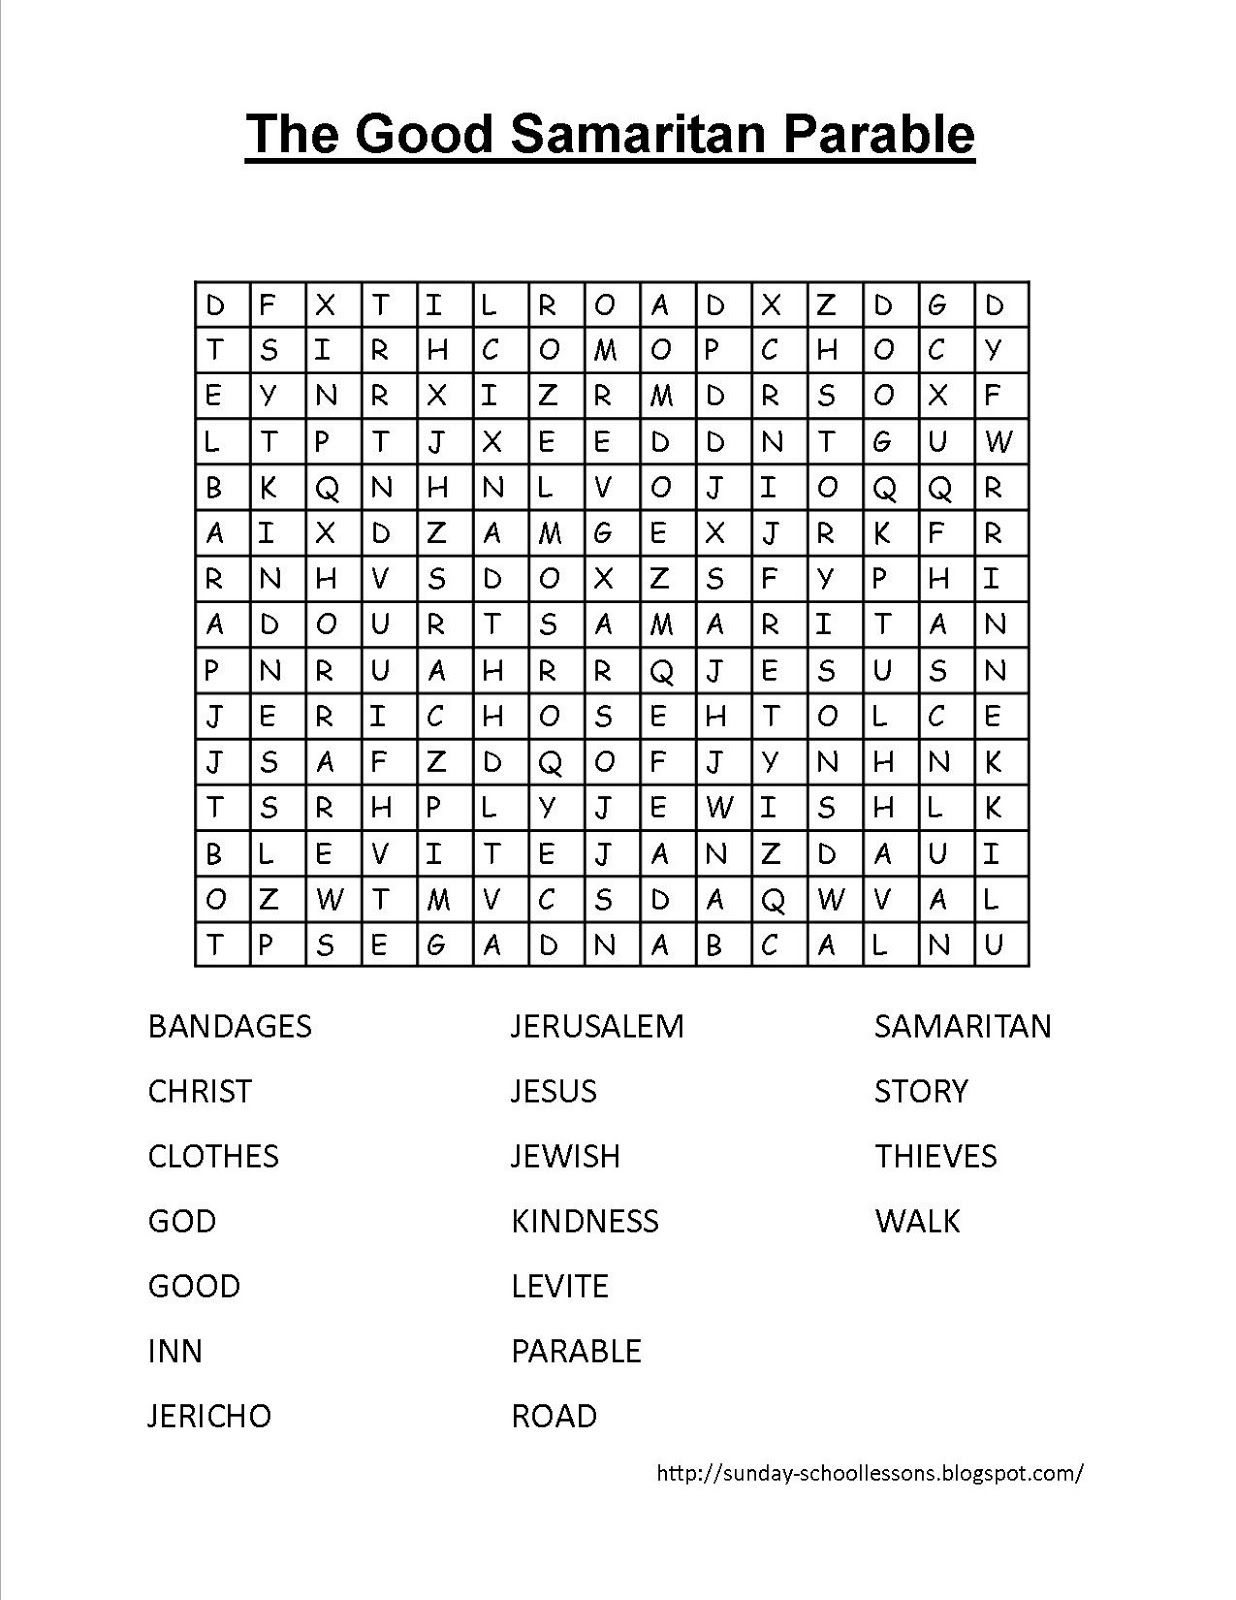 The Good Samaritan Crossword Puzzle (Free Printable) - Parables - Bible Crossword Puzzles For Kids Free Printable